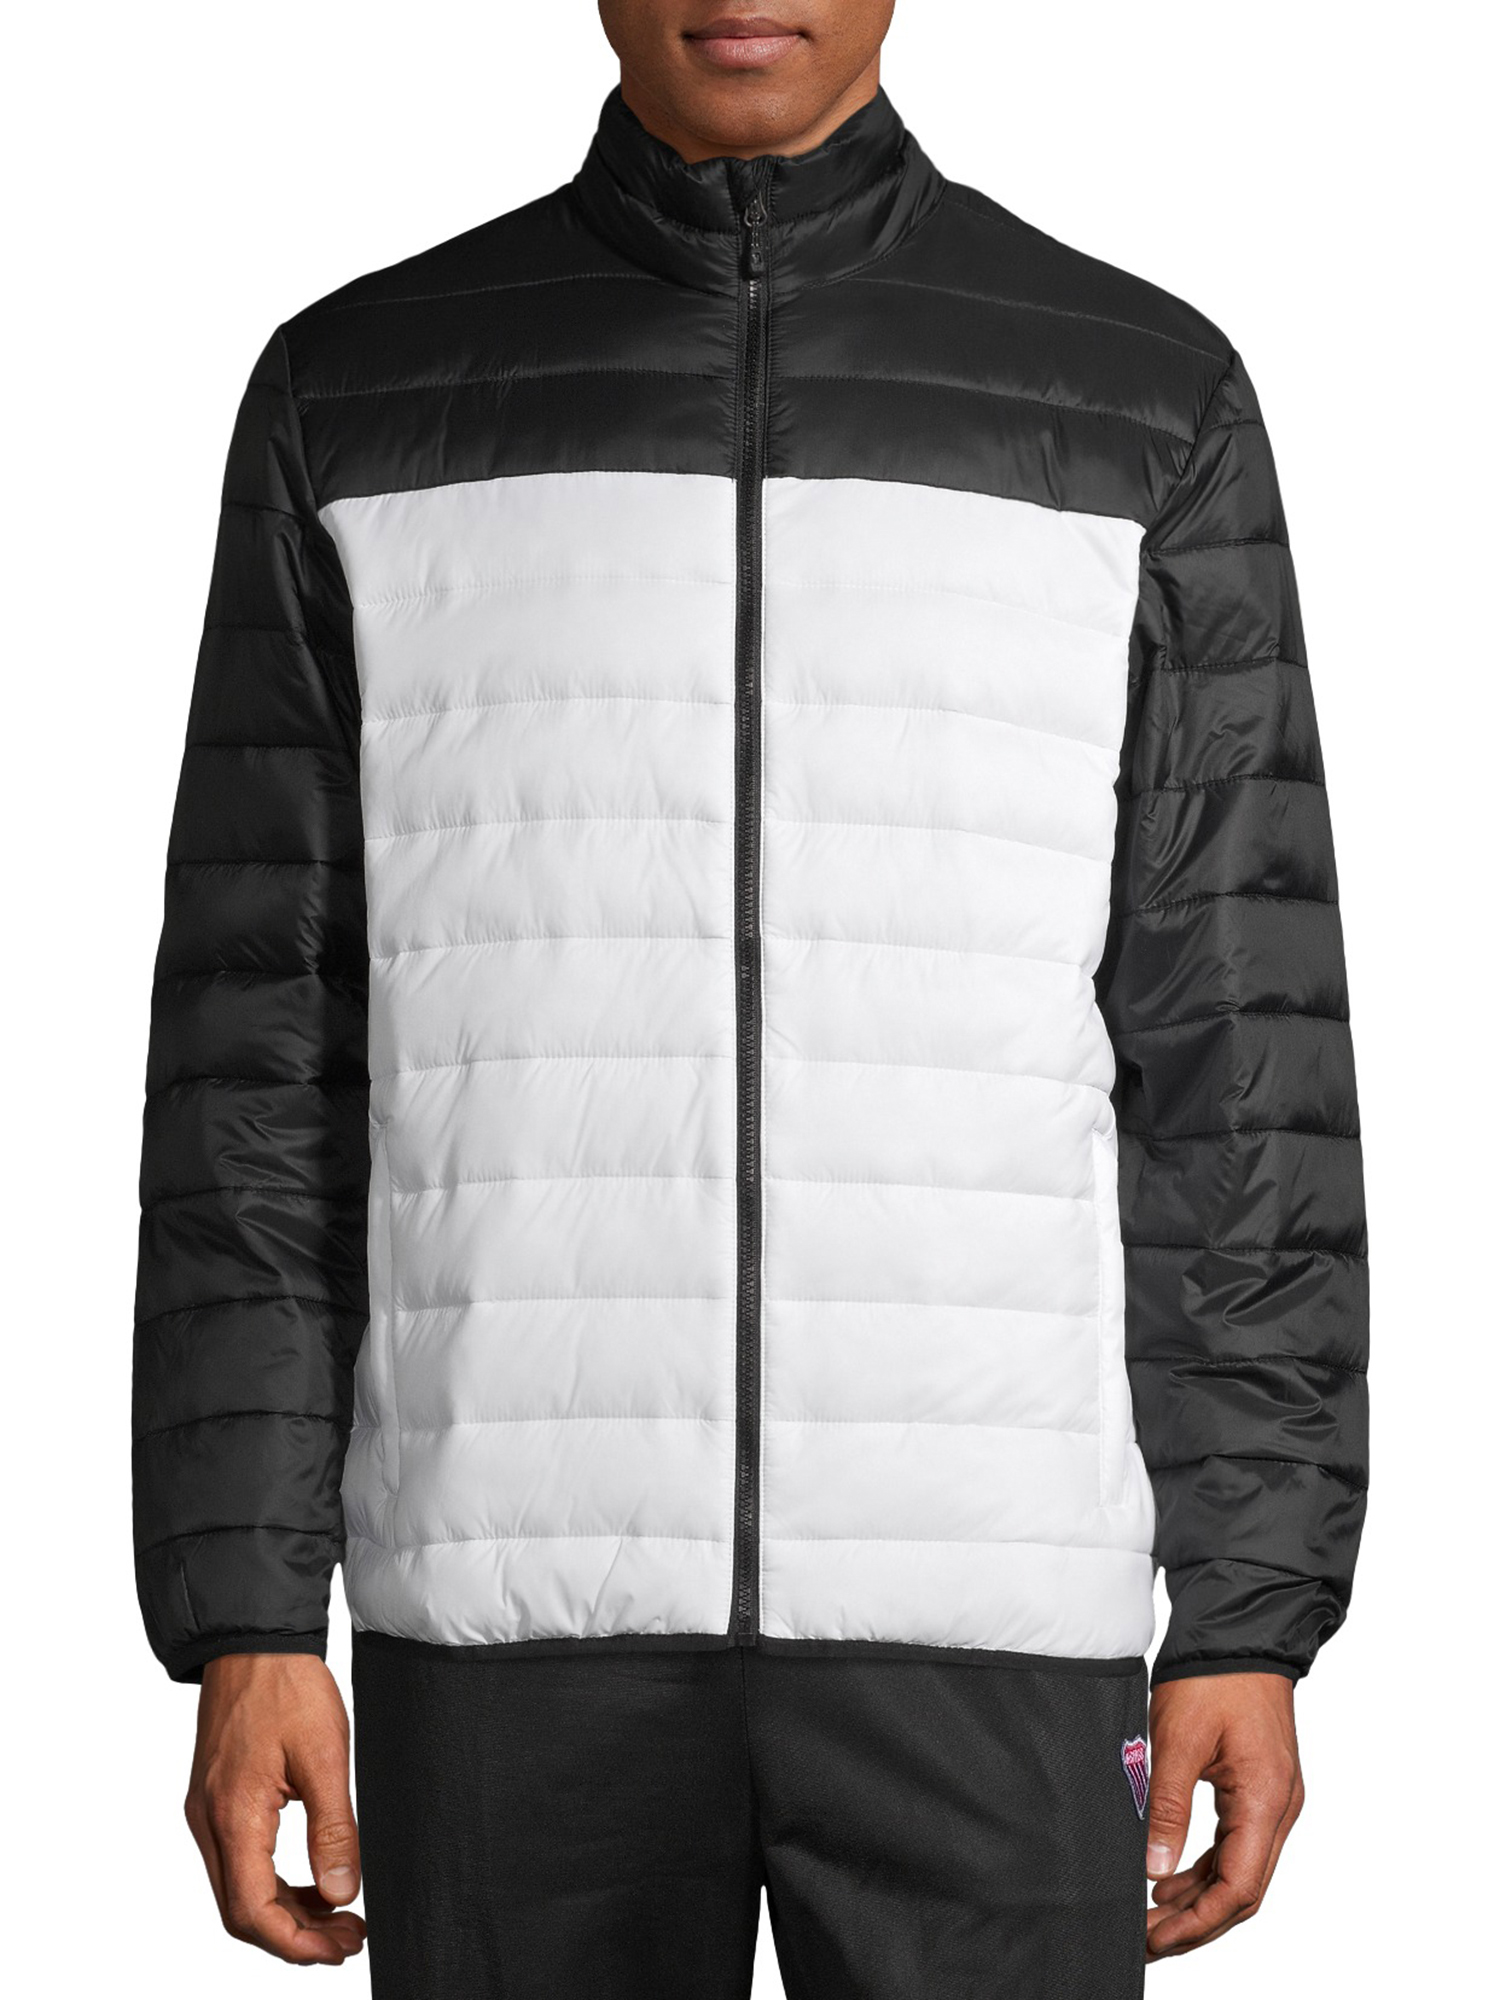 SwissTech Men's and Big Men's Puffer Jacket, Up to Size 5XL - image 1 of 6